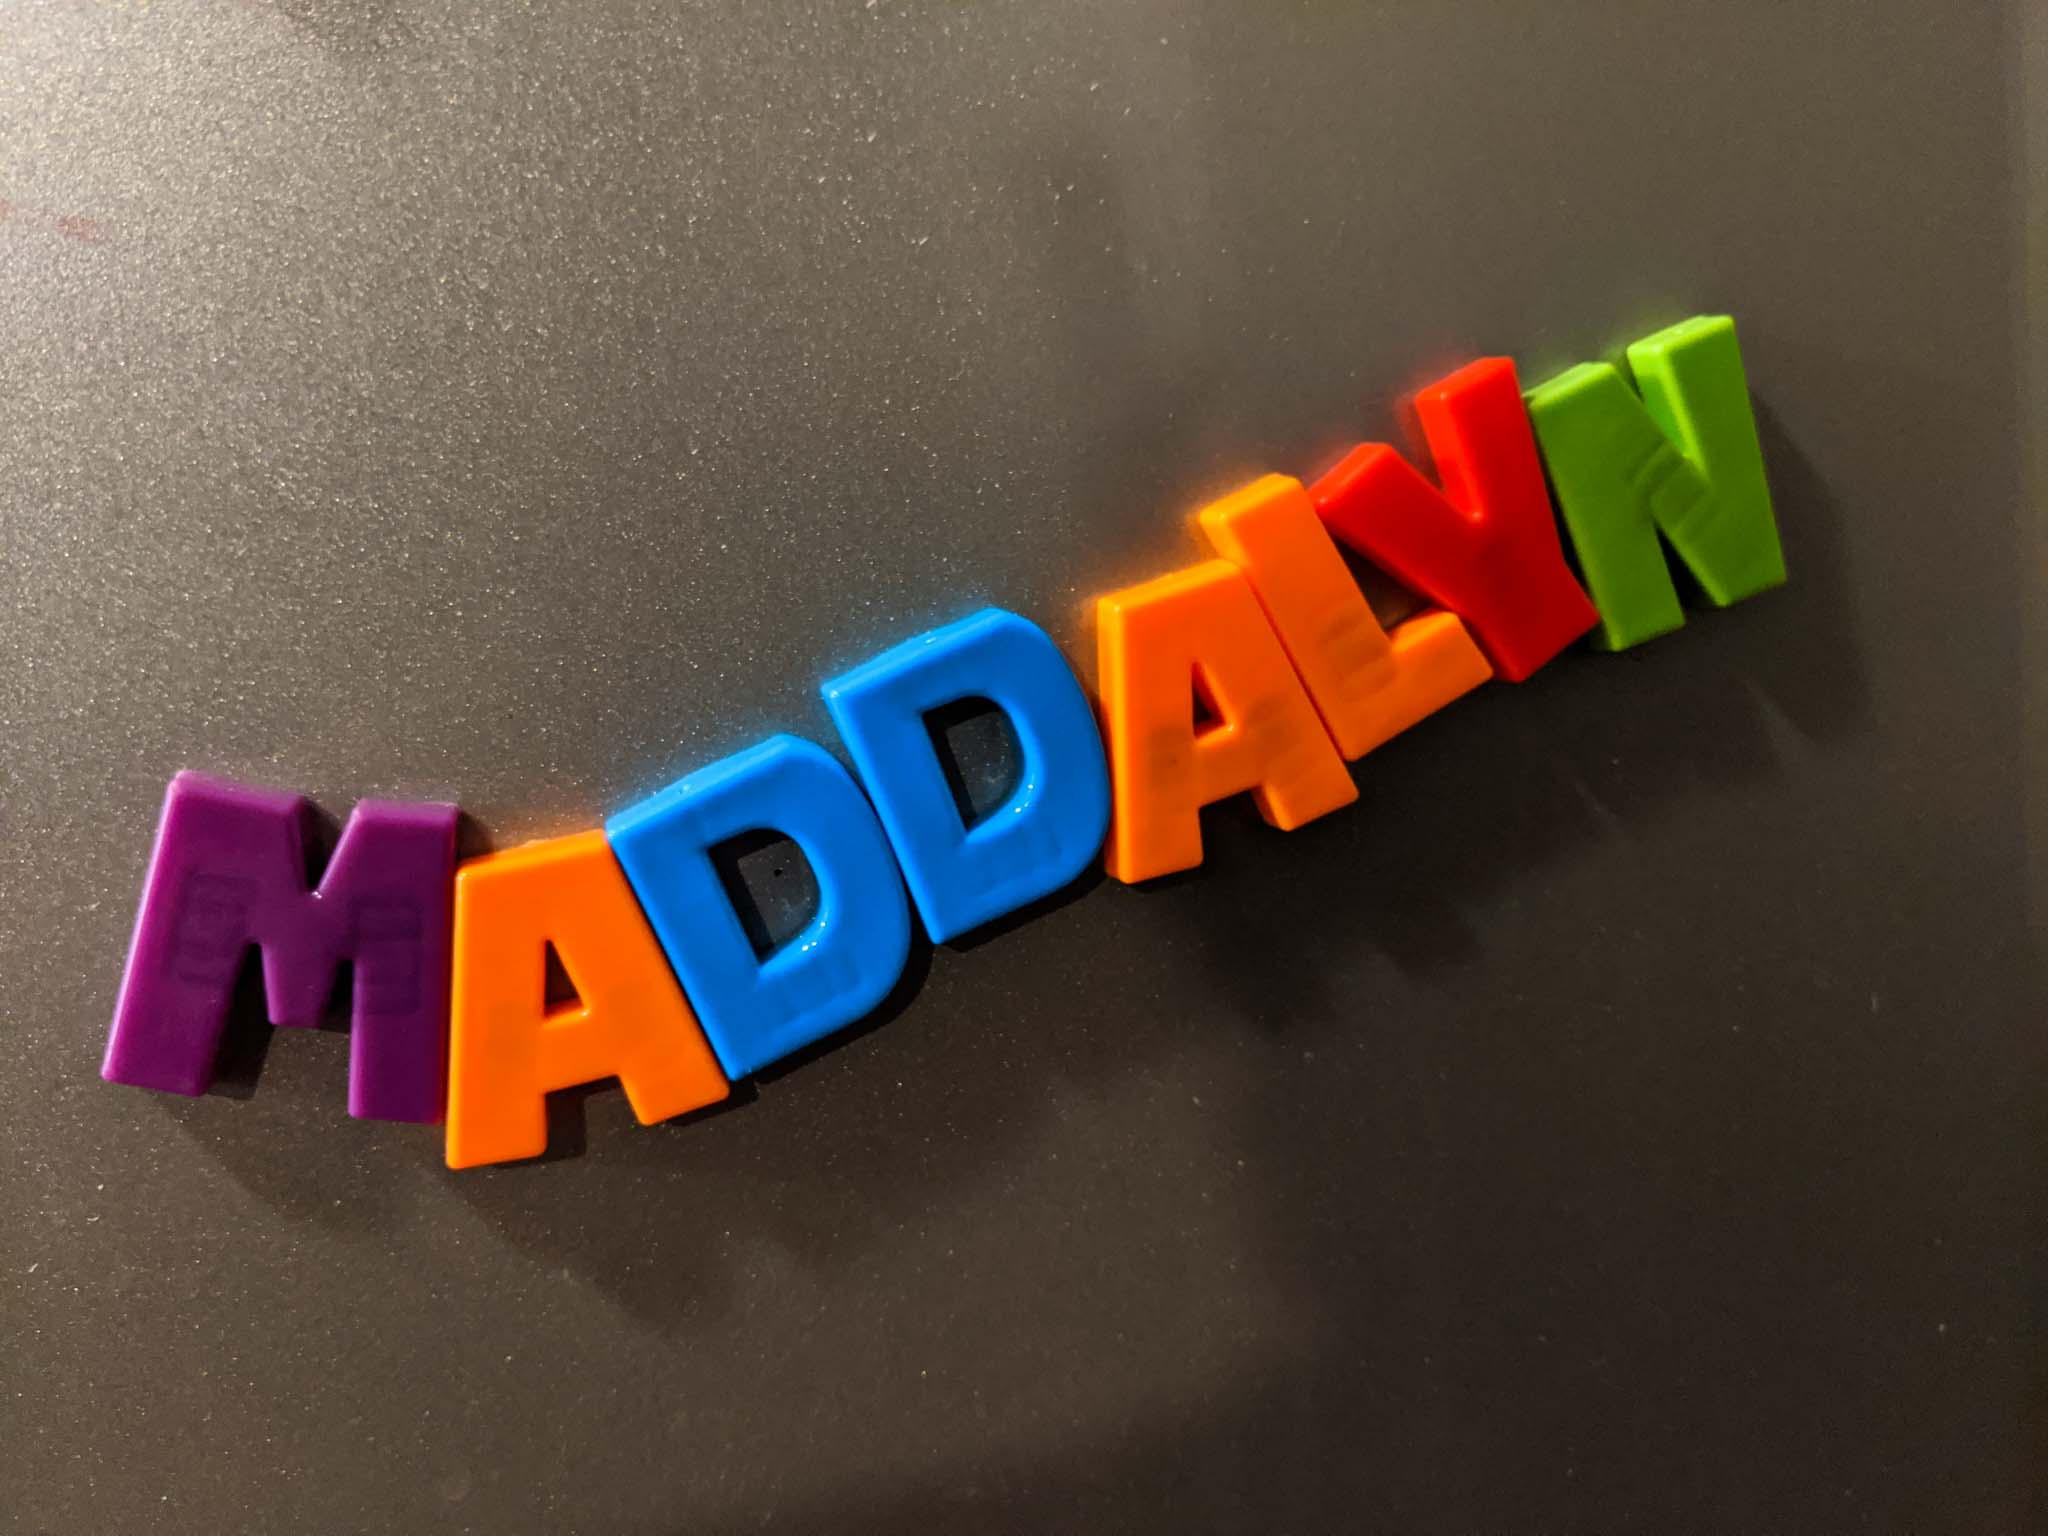 Maddalyn. My daughter spelled her name in refrigerator magnets. Major win!